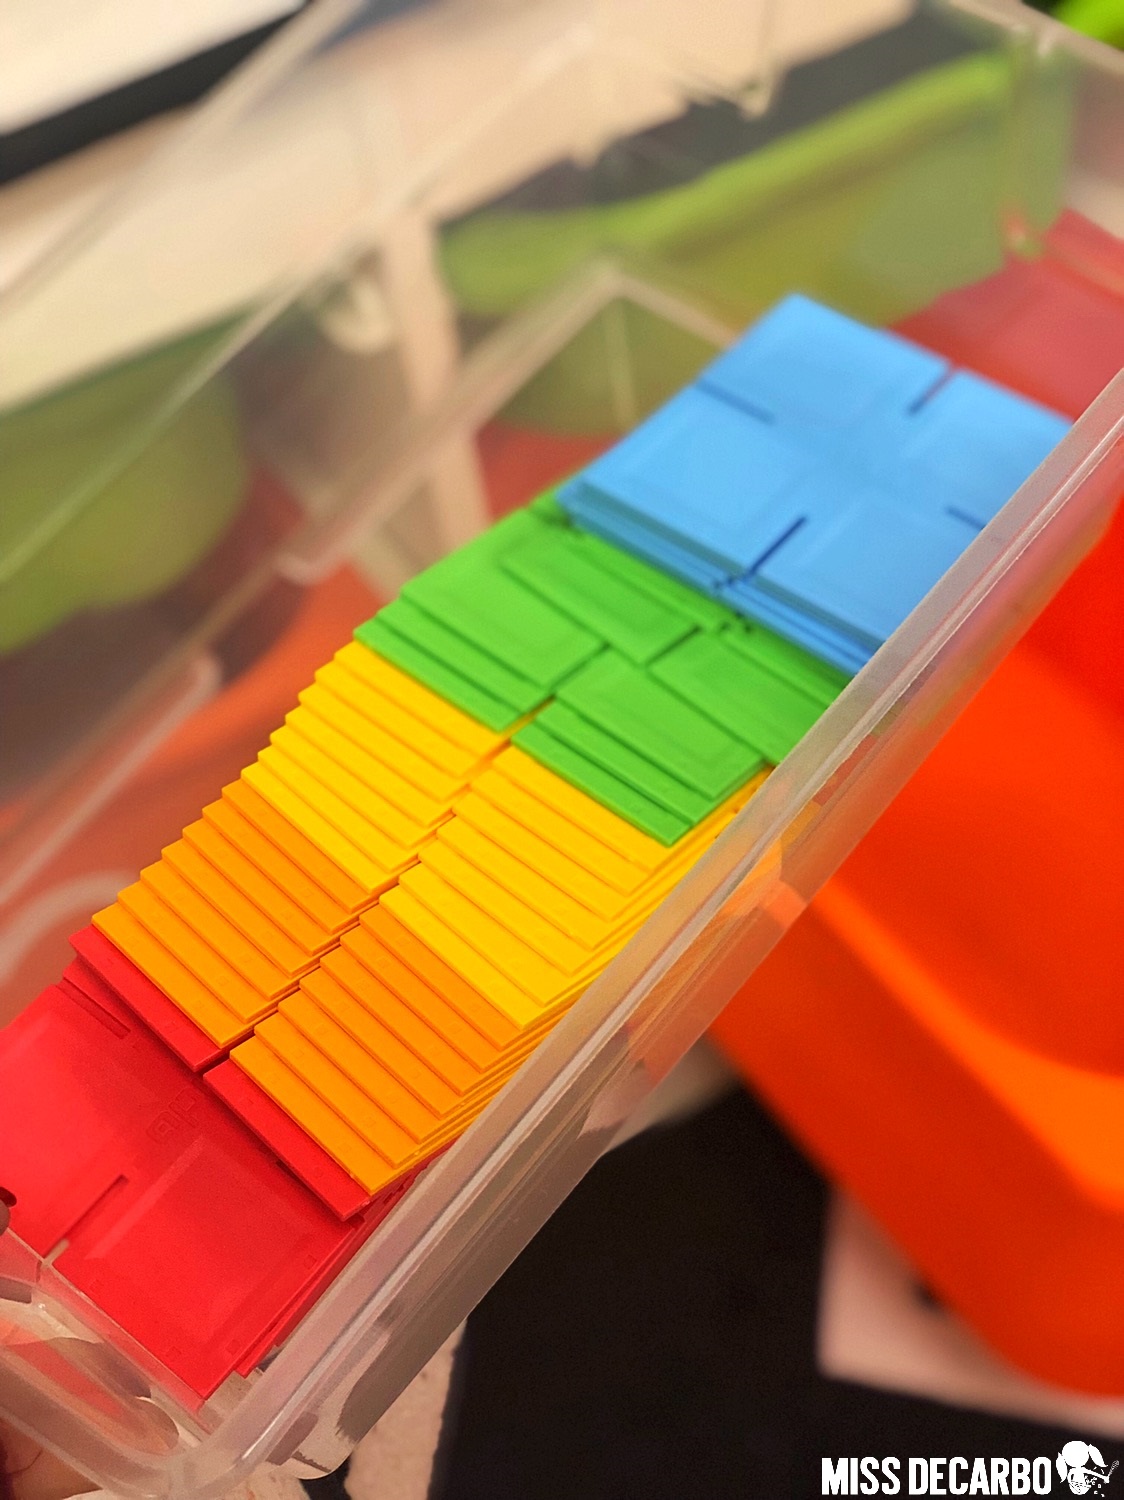 Brain bins are morning tubs that are integrated into the classroom to promote problem-solving, boost creativity, and engage students in open-ended creativity. Learn how Christina sets up and manages brain bins, and find TONS of ideas for morning tubs!